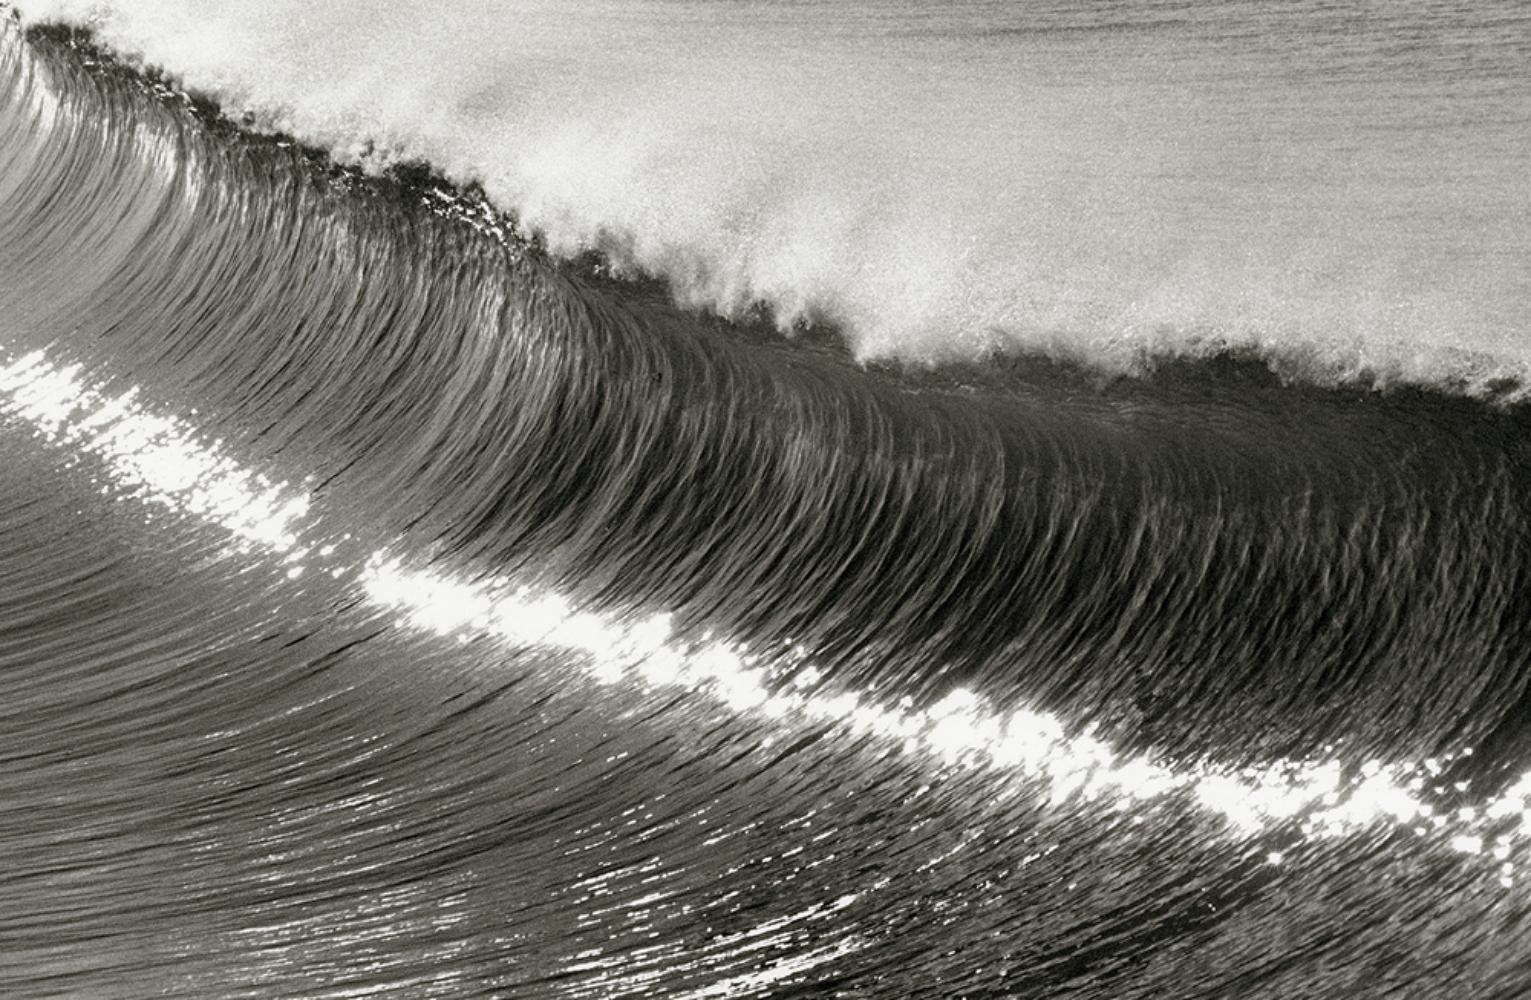 Anthony FRIEDKIN (*1949, America)
Sculpted Wave, Hermosa Beach, California, U.S.A., 2005
Silver Gelatin Print, later print
40.6 x 50.8 cm (16 x 20 in.)
Edition of 25, Ed. no. 4/25
Print only

Born 1949 in Los Angeles, USA, Friedkin currently lives